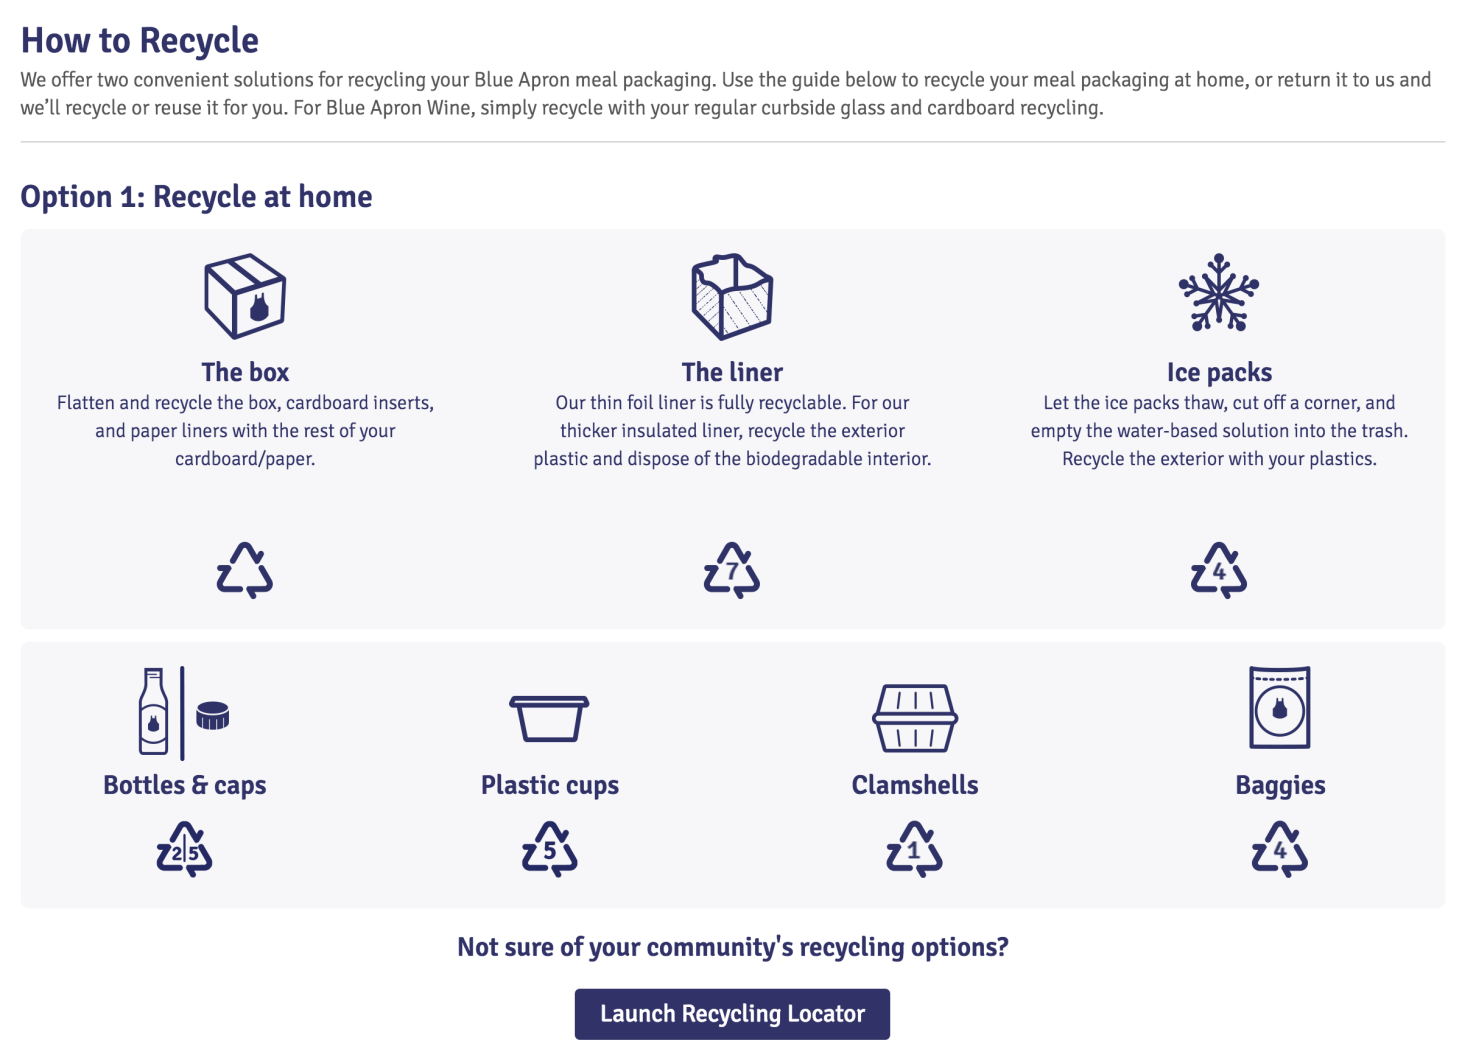 Blue Apron's recycling guide.